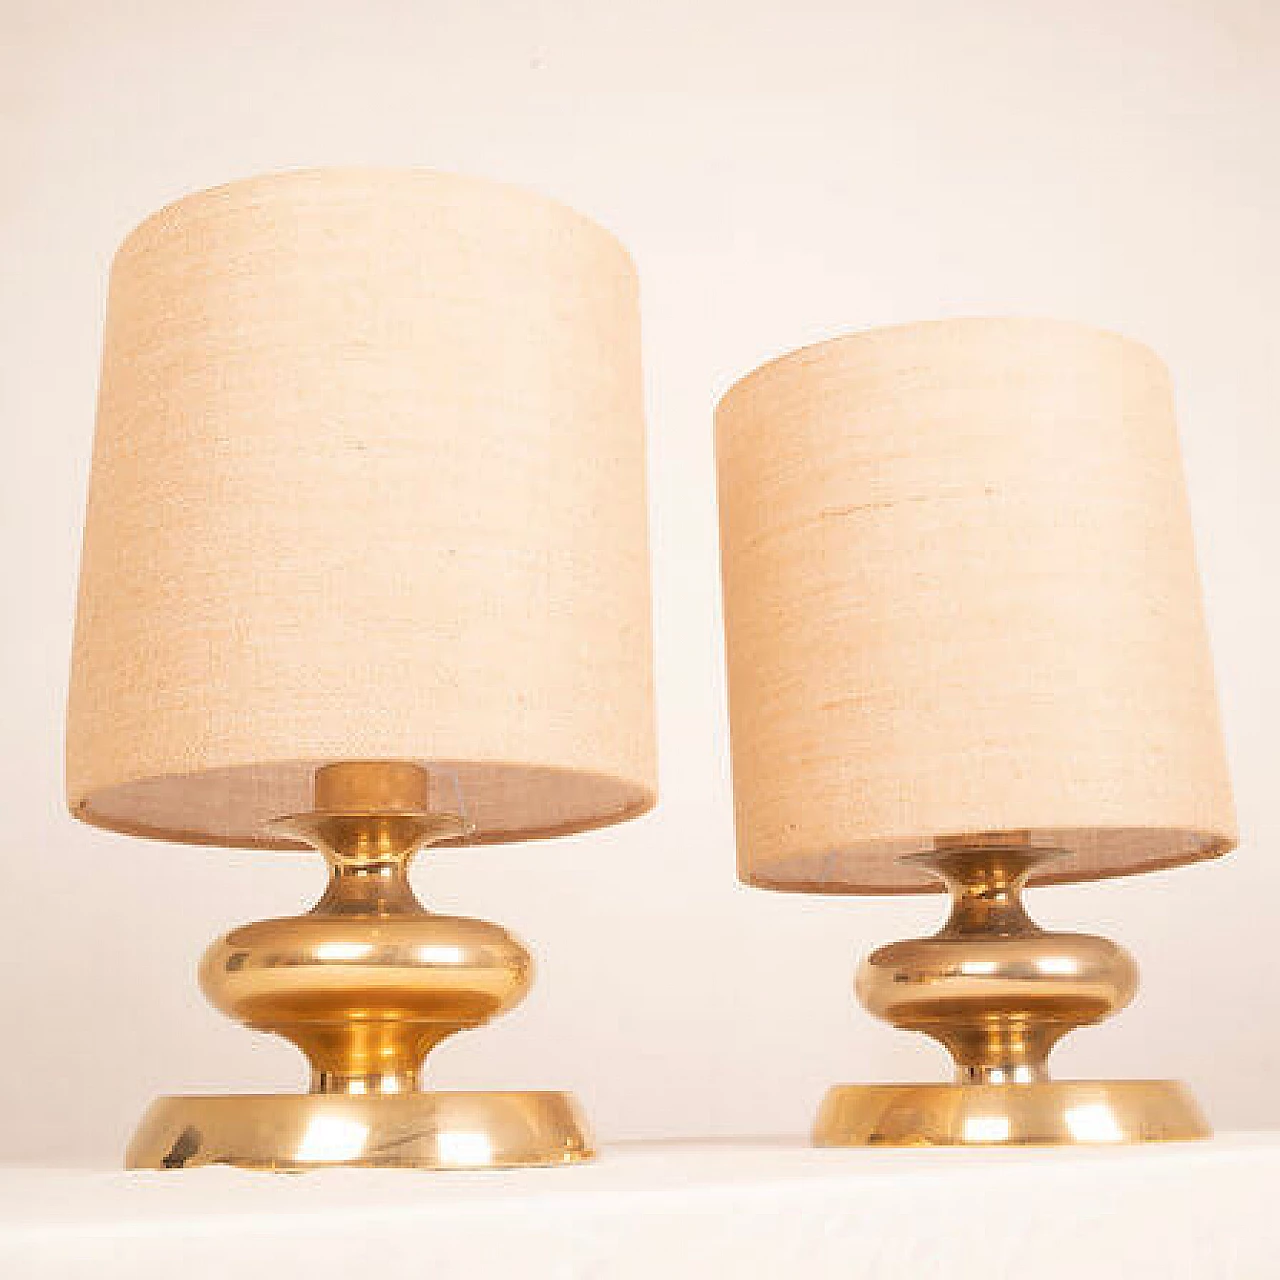 Pair of Gold24K Edition C-363 table lamps by Luci, 1970s 1